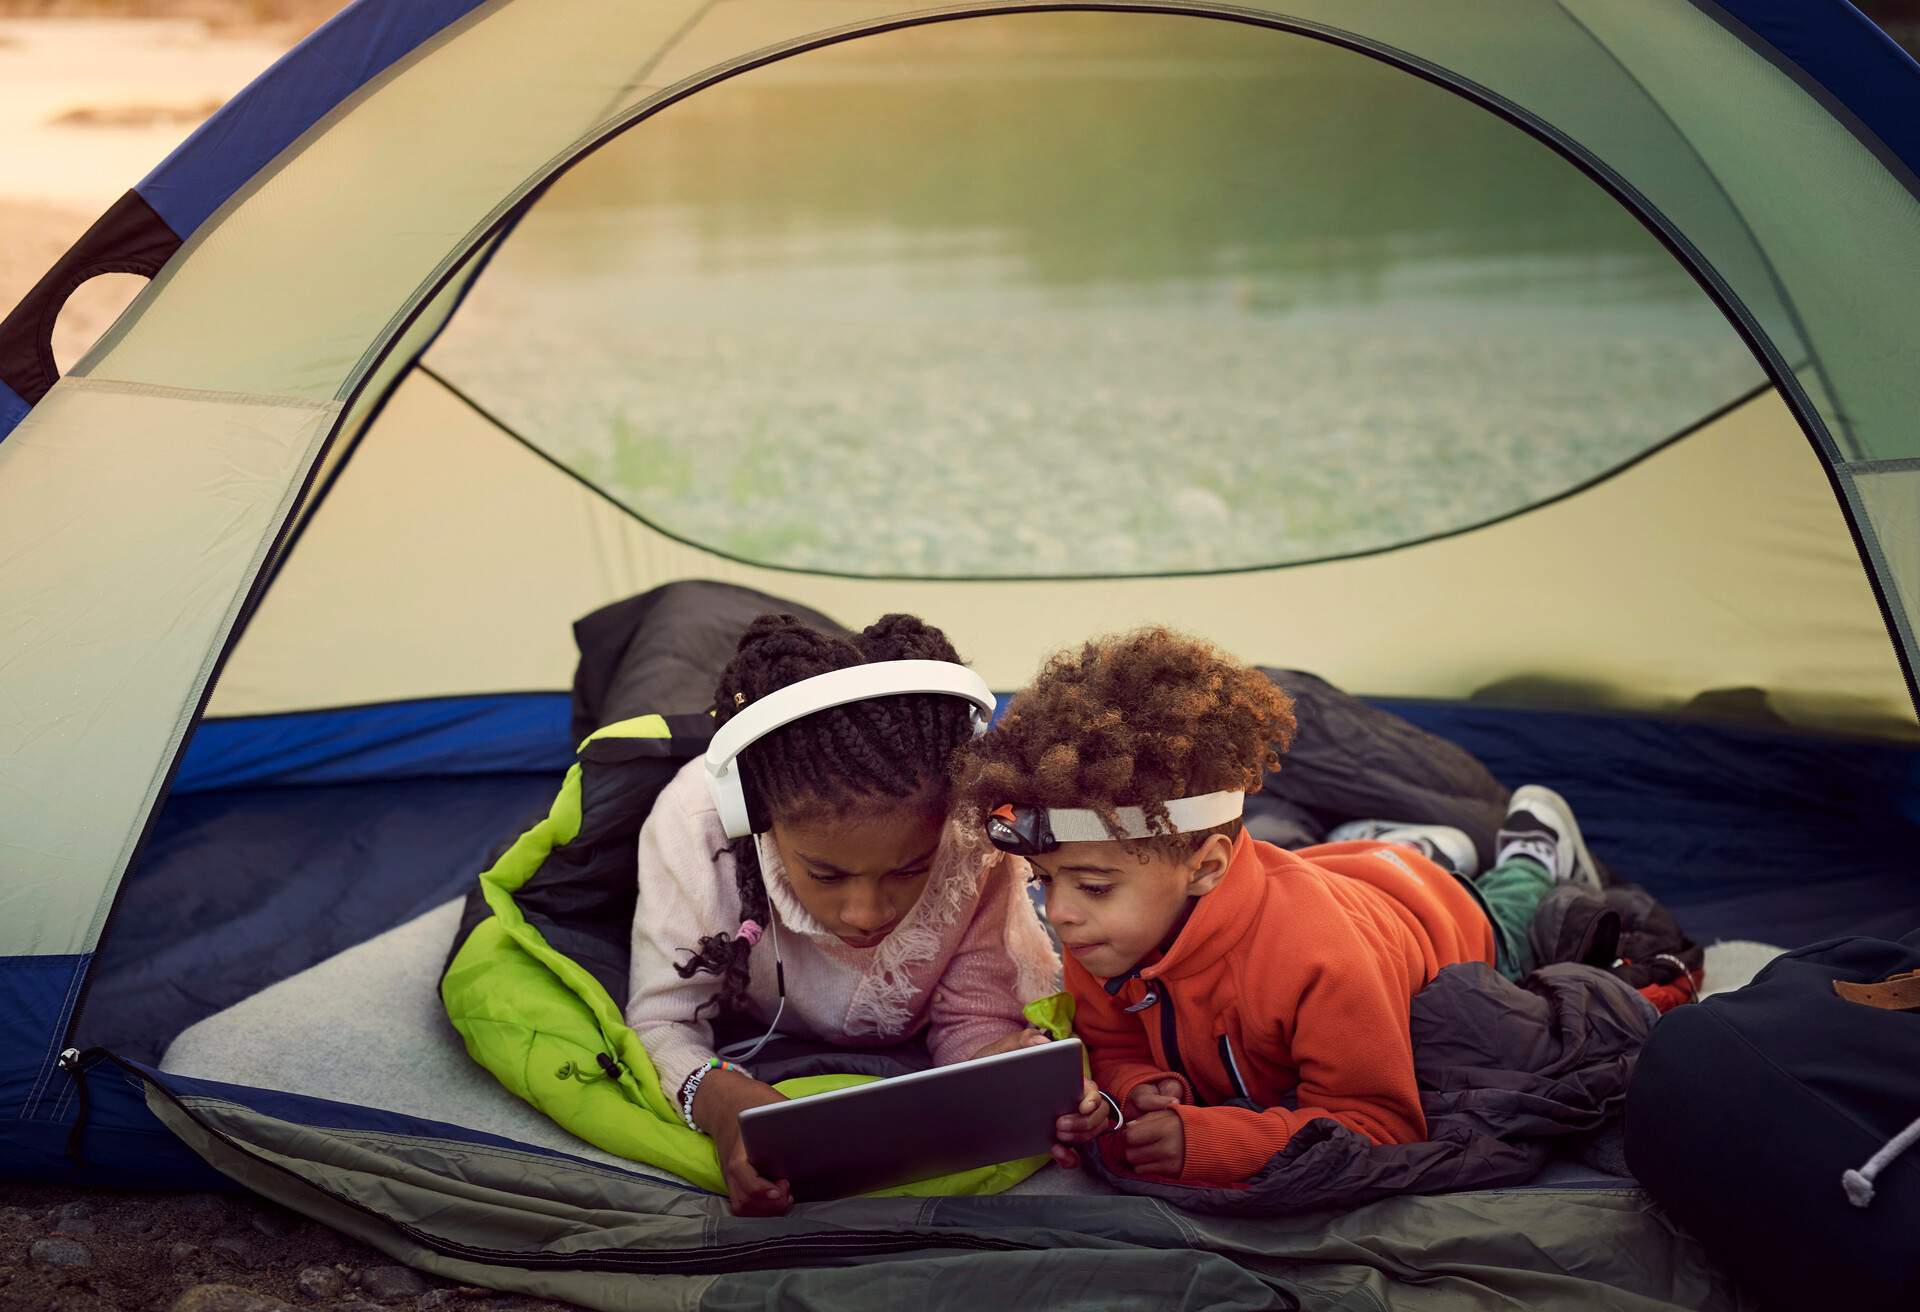 TRAVEL_PEOPLE_KIDS_CAMPING_CAMP_TENT_OUTDOORS_VACATION